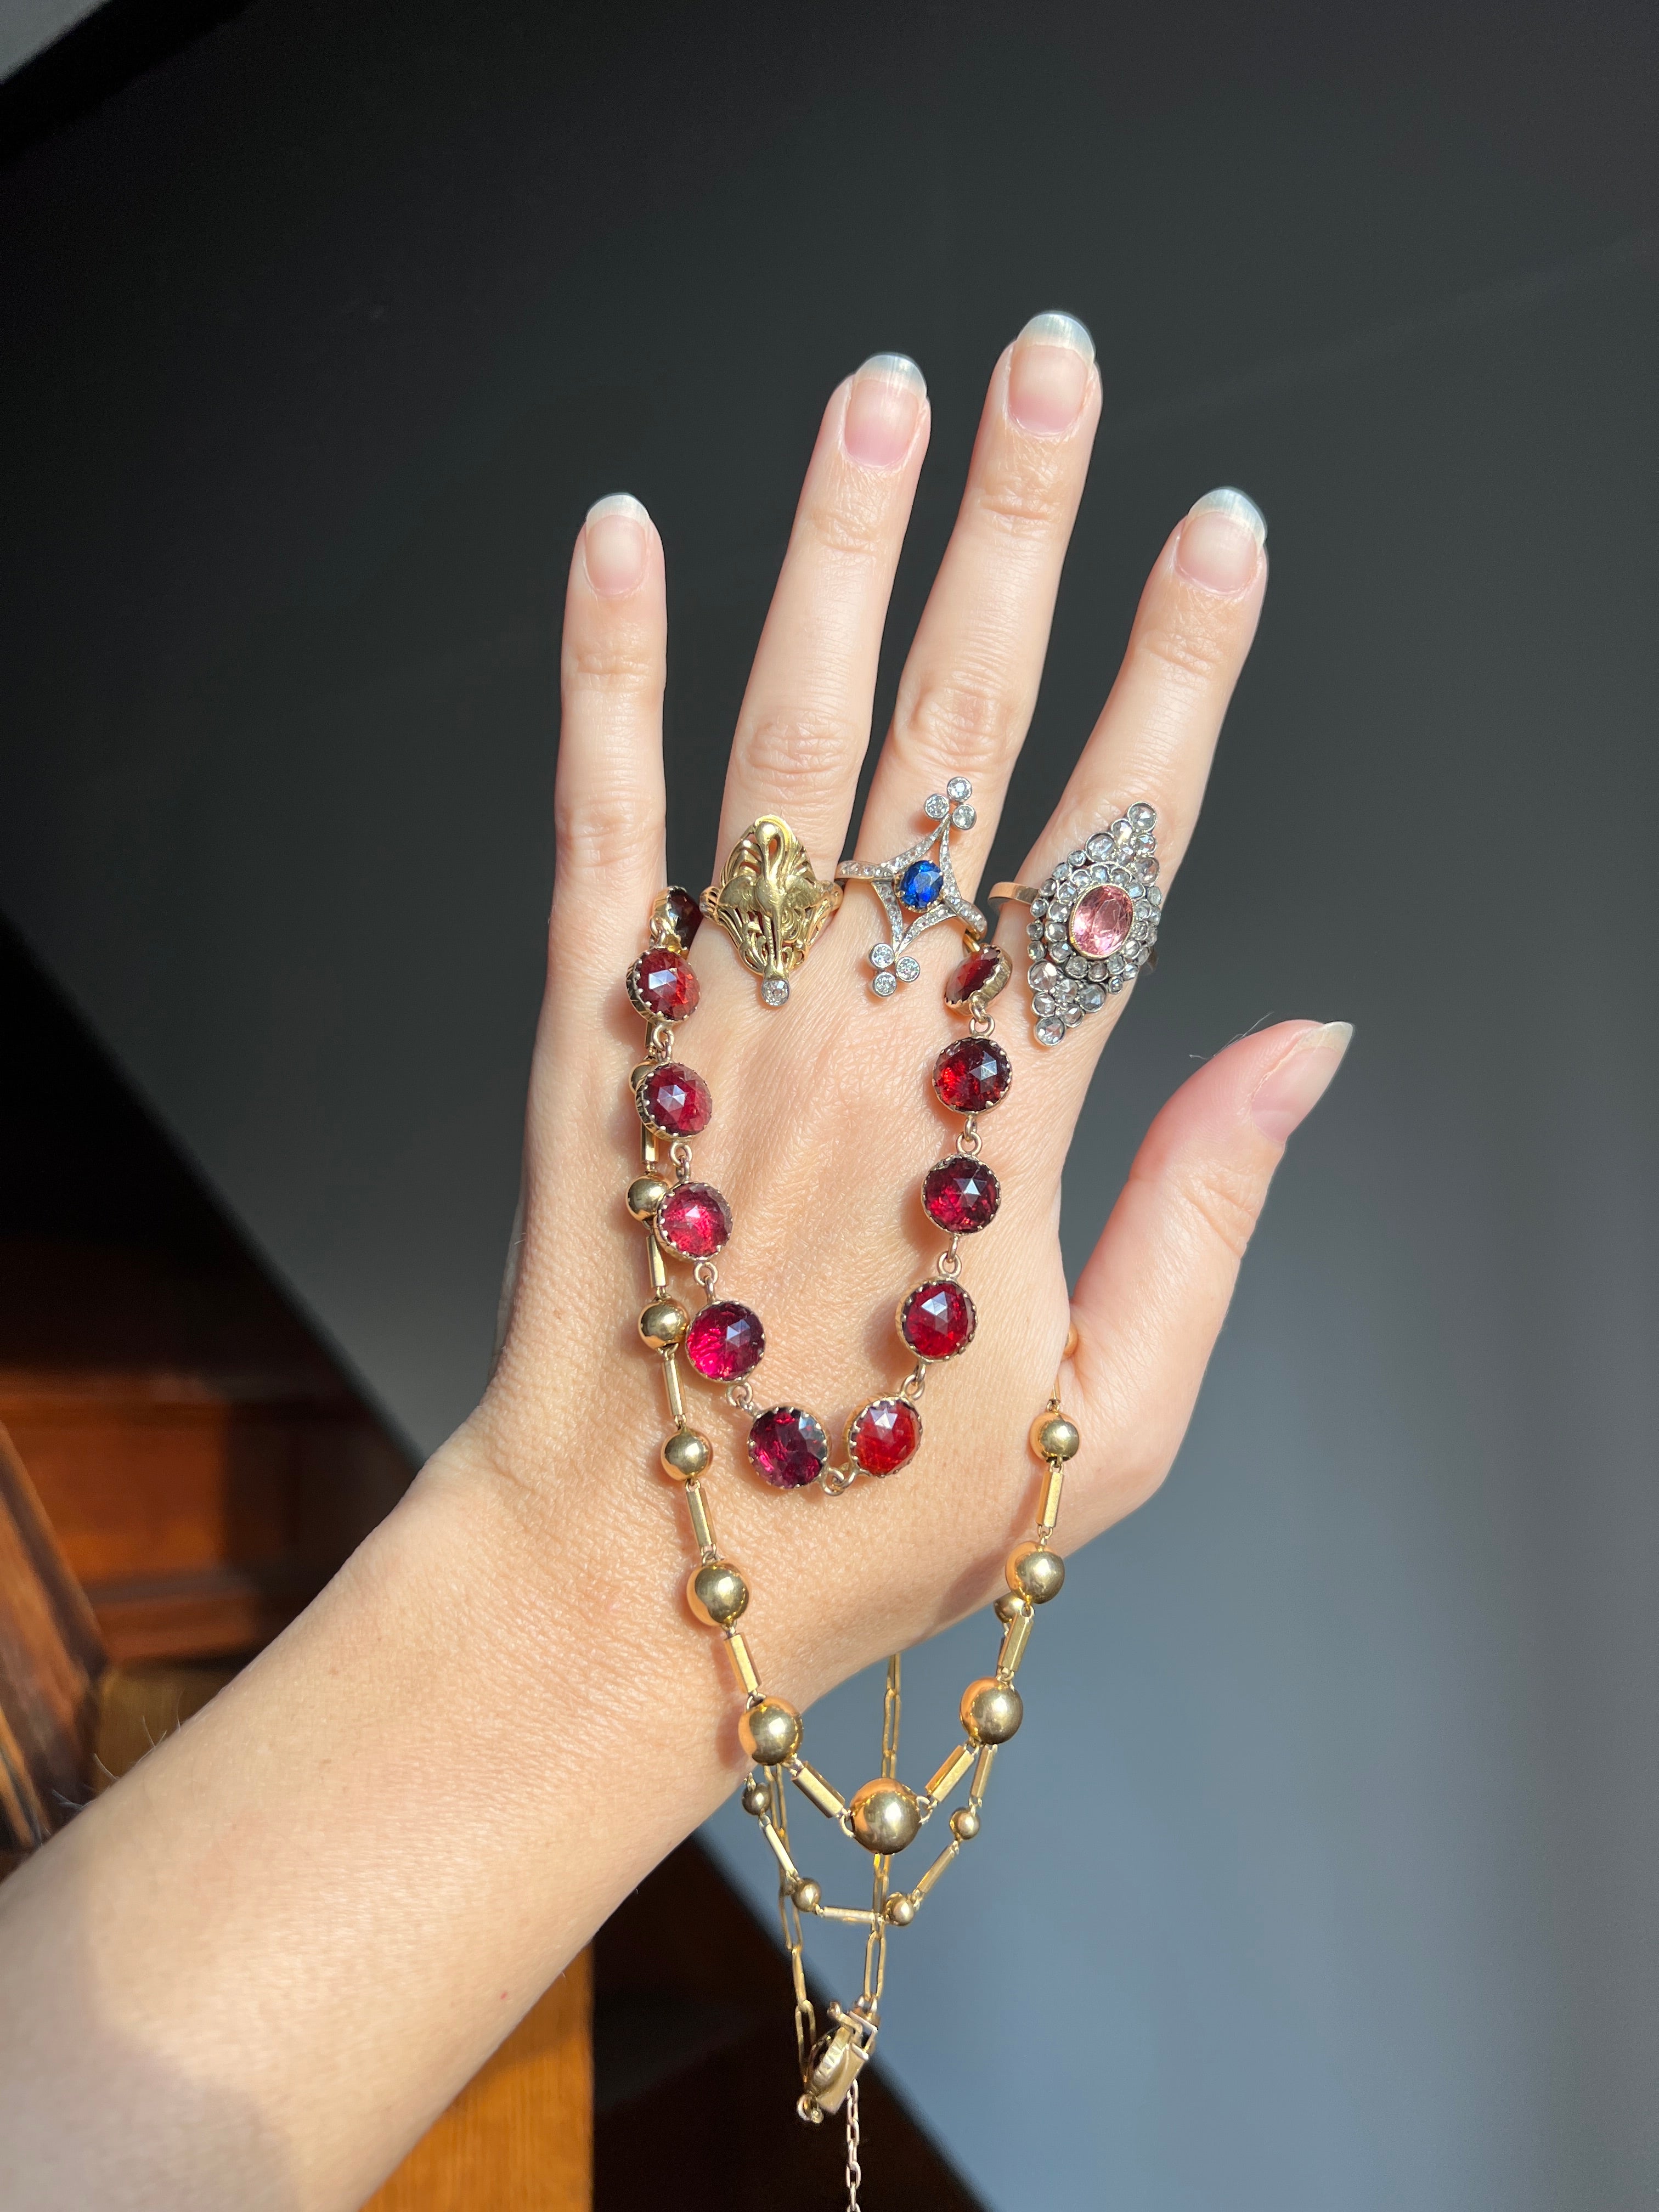 What is the name of this kind of bracelet? Are there similar ones, but only  with links to certain fingers? Thank you. : r/jewelry